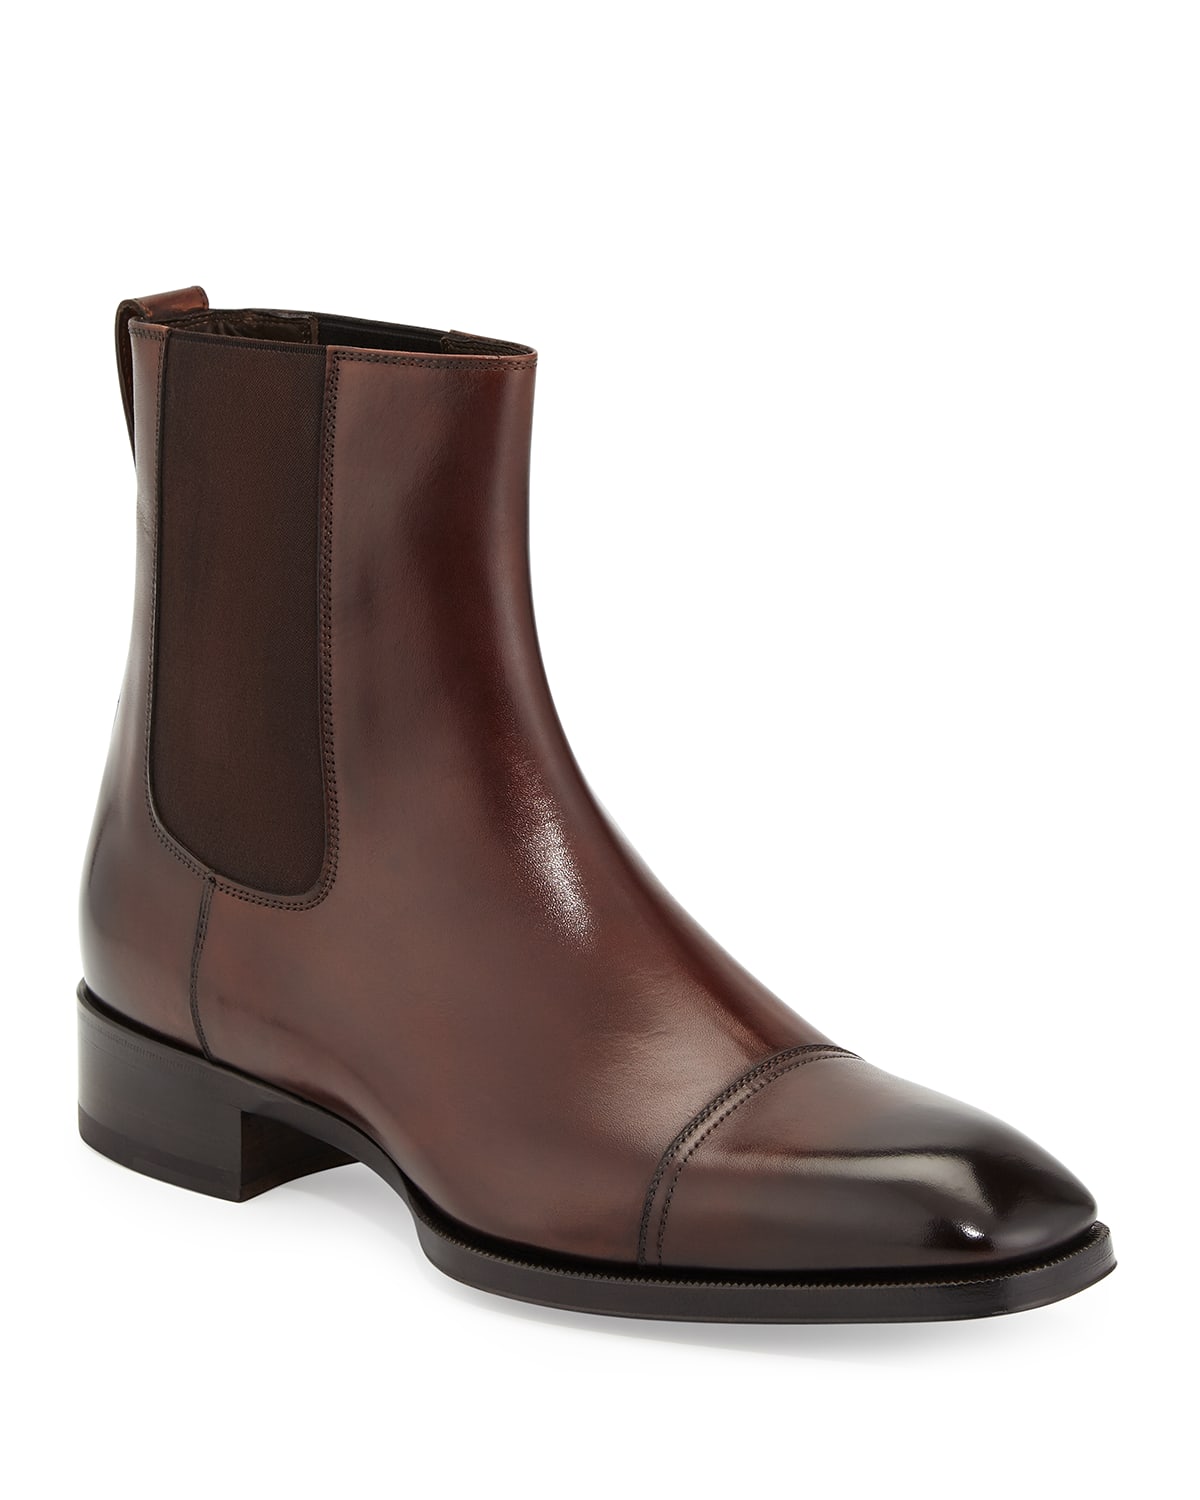 TOM FORD Gianni Leather Chelsea Boots